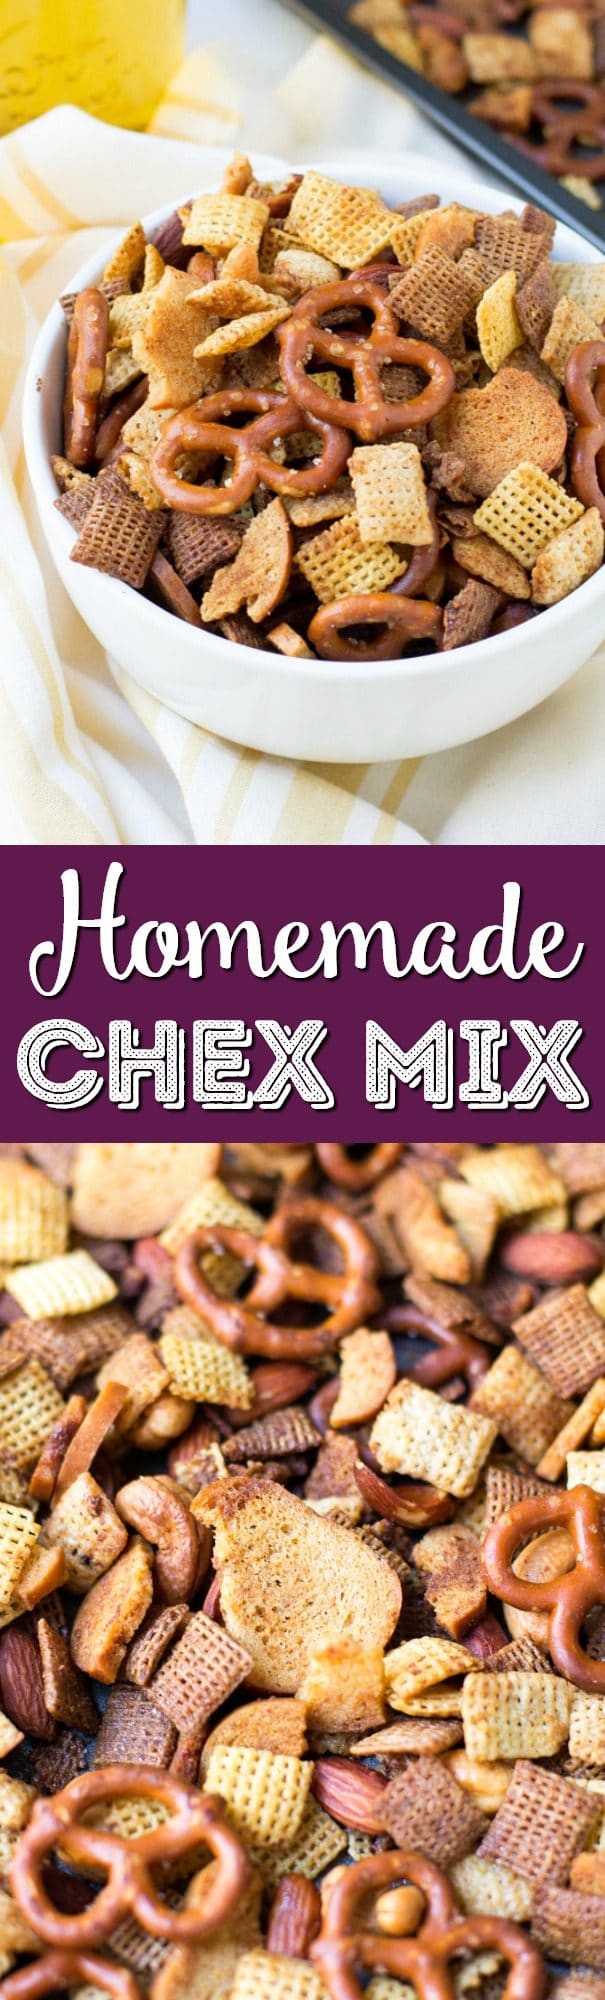 This Homemade Chex Mix is crunchy, buttery and full of flavor this easy party mix is the perfect snack for holiday entertaining!